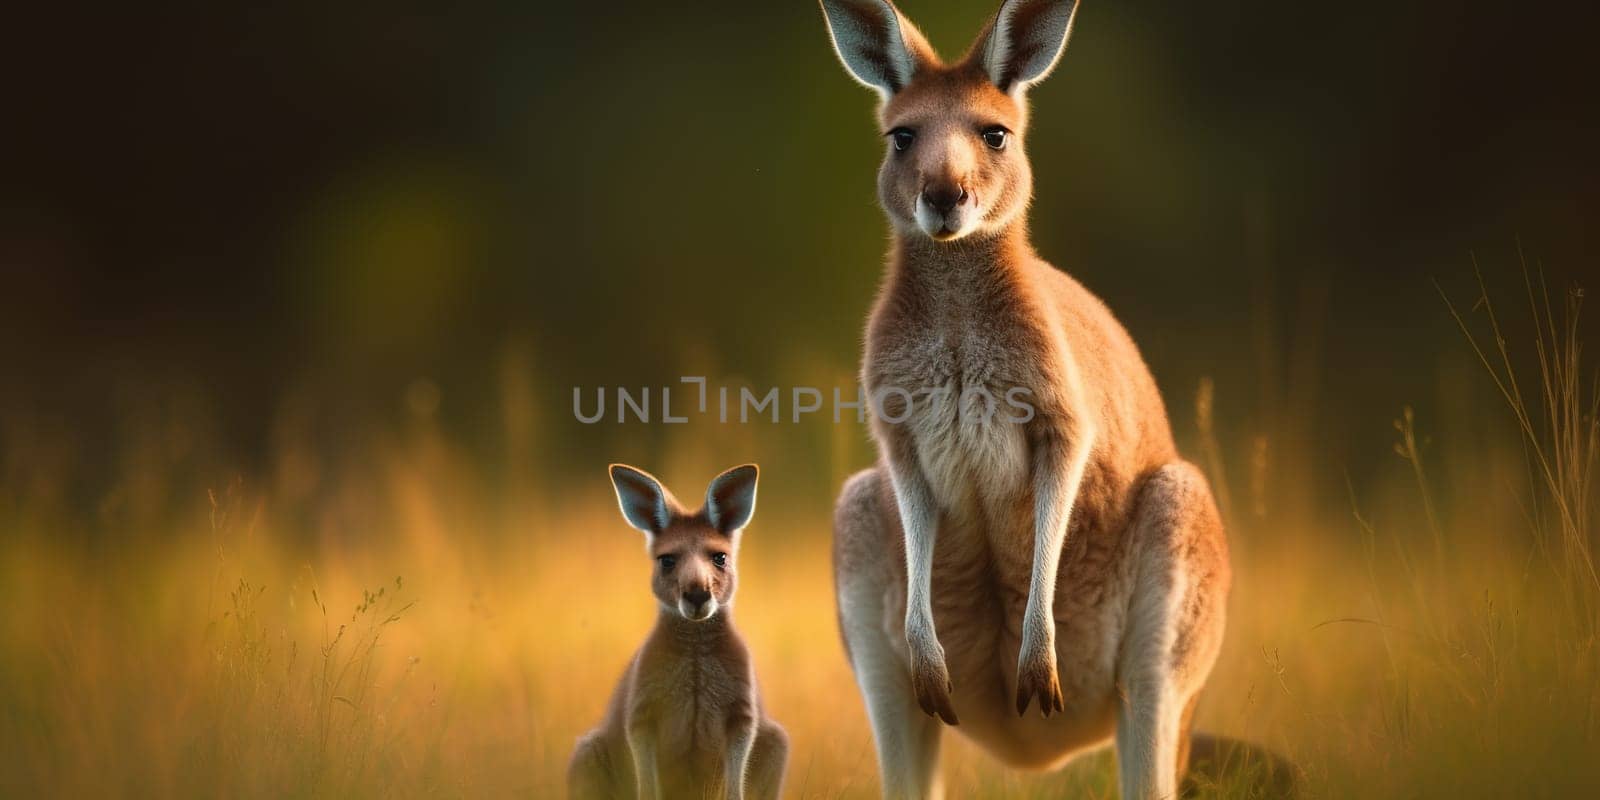 Adult kangaroo with baby looking in camera in the steppe by tan4ikk1